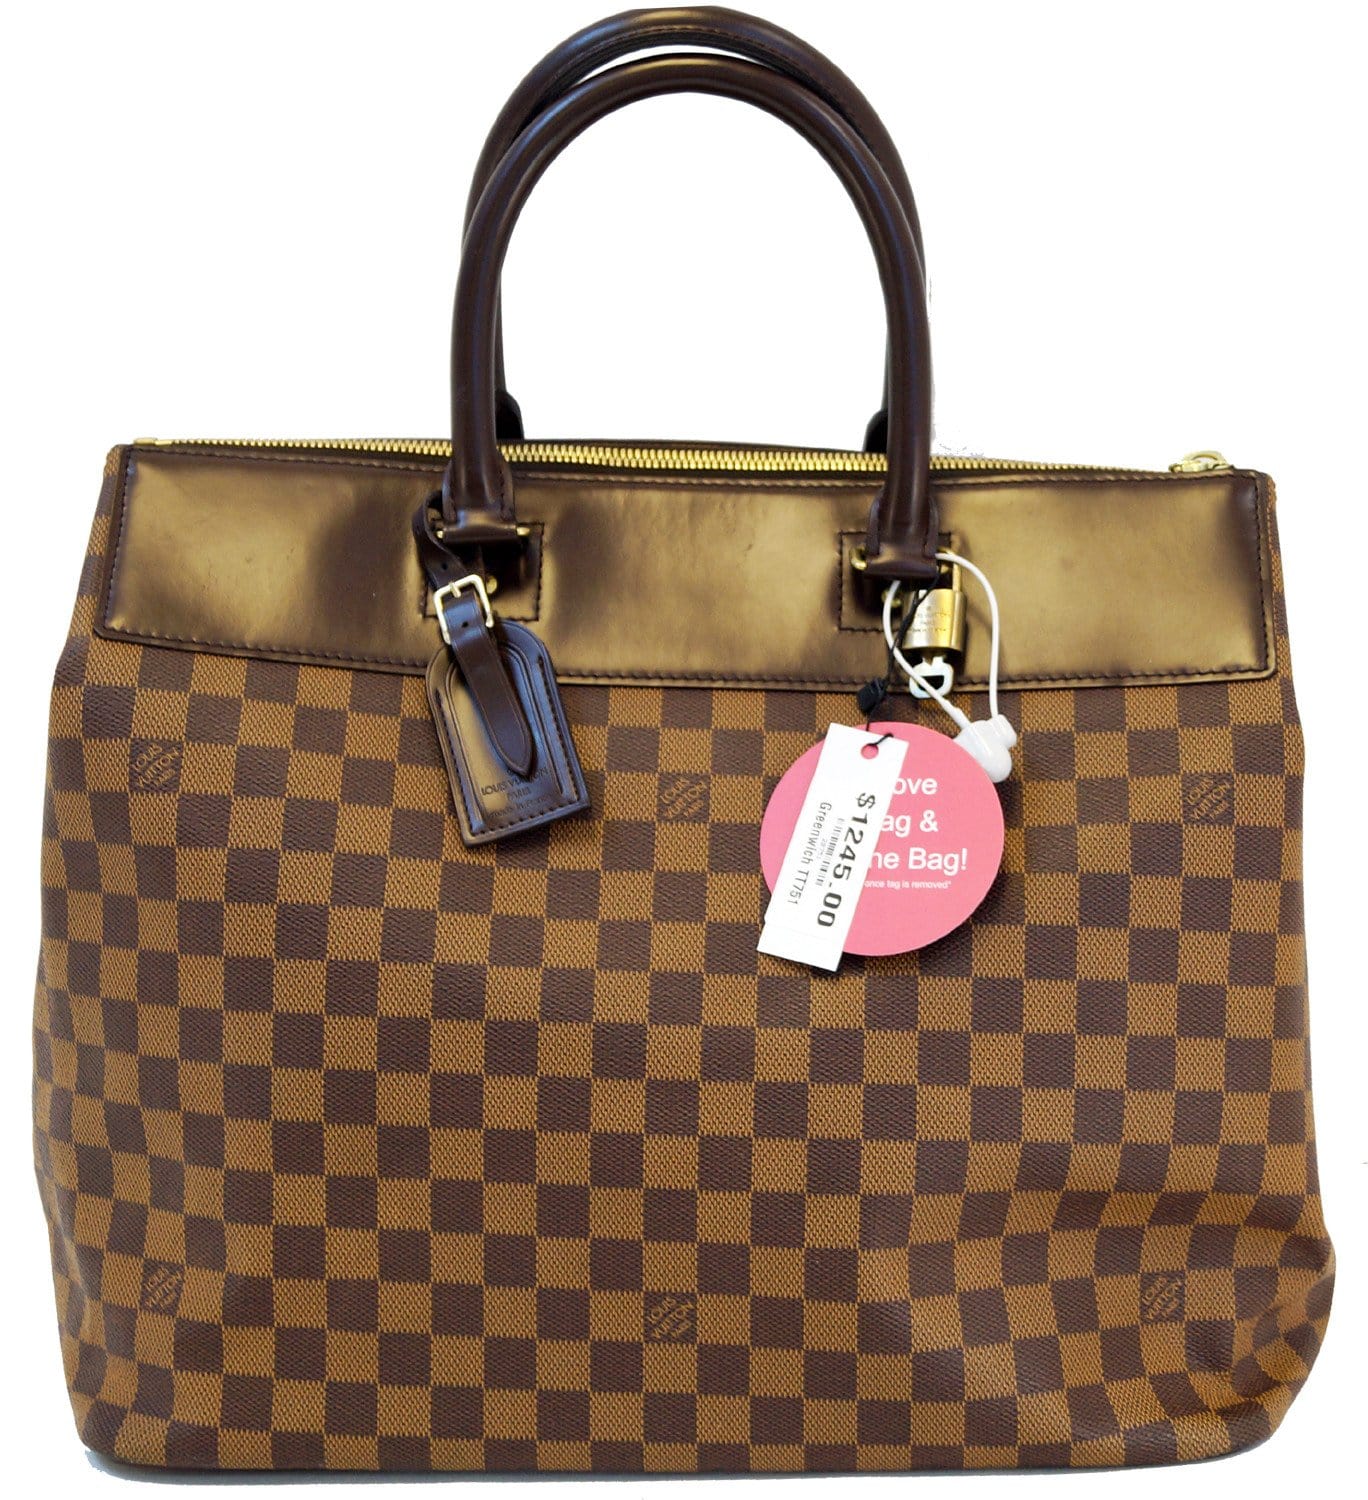 Louis Vuitton Greenwich Pm Brown Canvas Handbag (Pre-Owned) – Bluefly